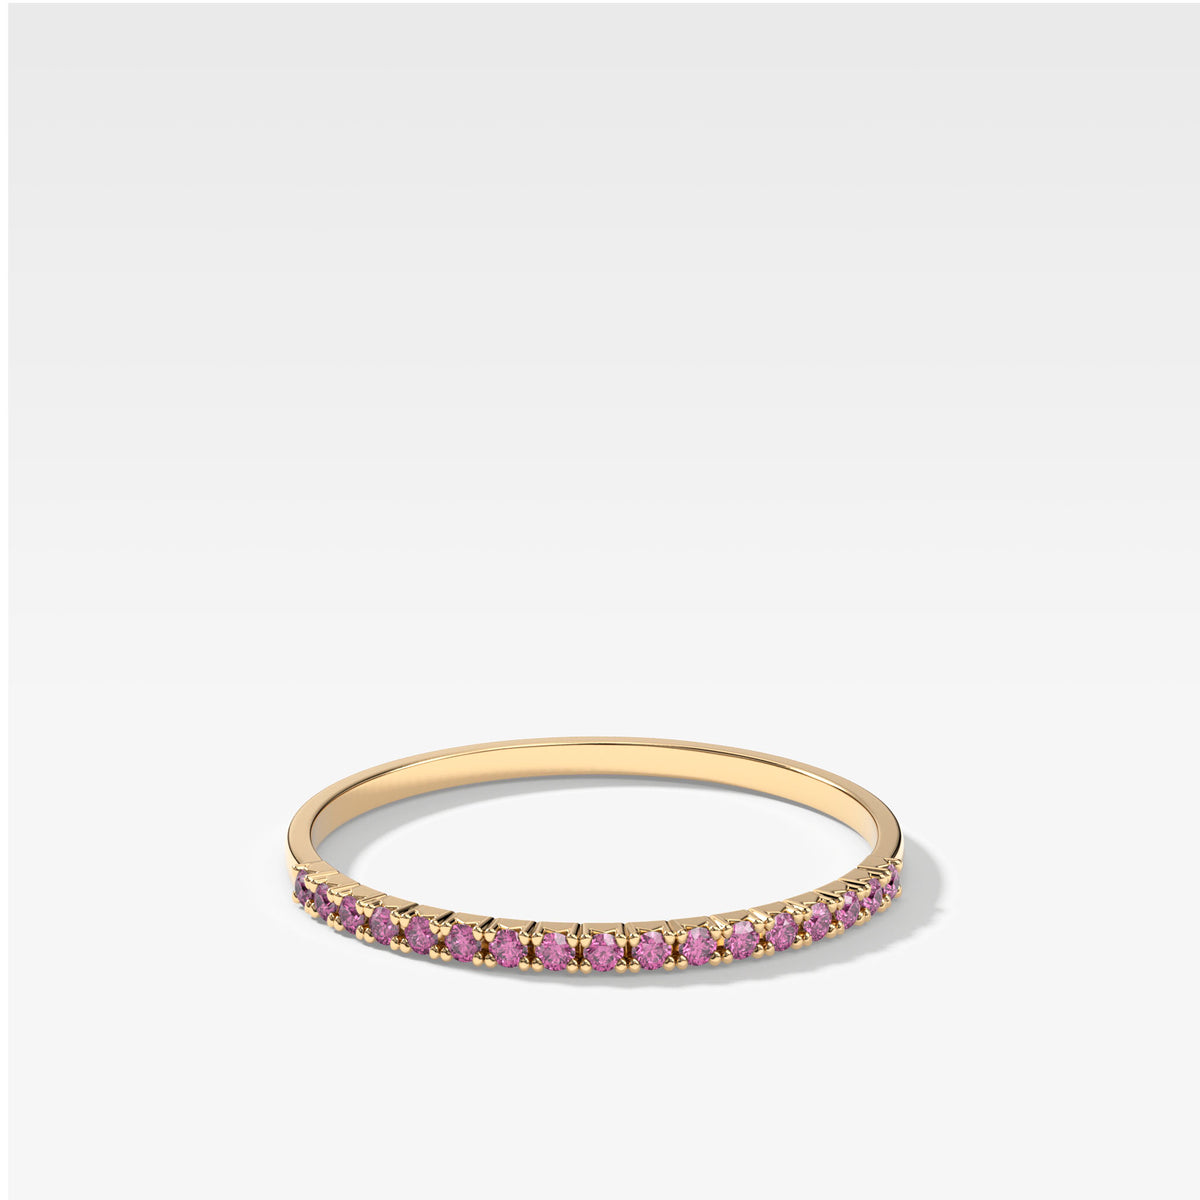 Petite French Pavé Wedding Band With Pink Sapphires